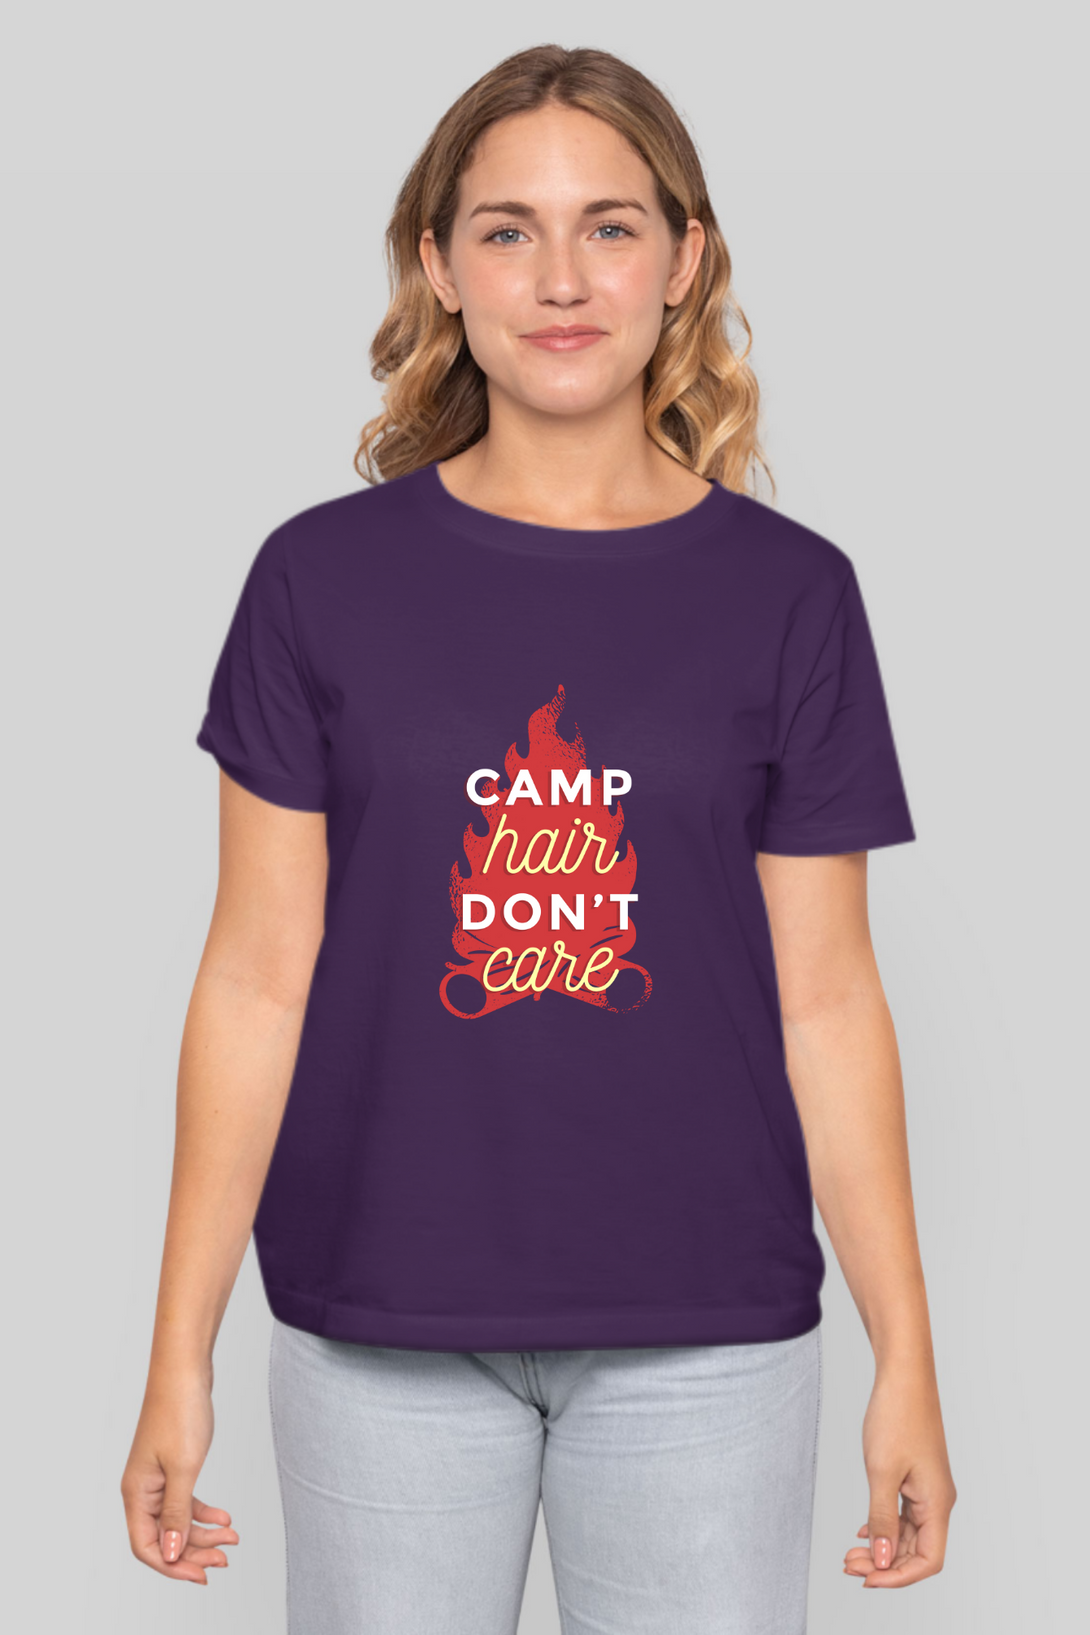 Camping Vibes Printed T-Shirt For Women - WowWaves - 9